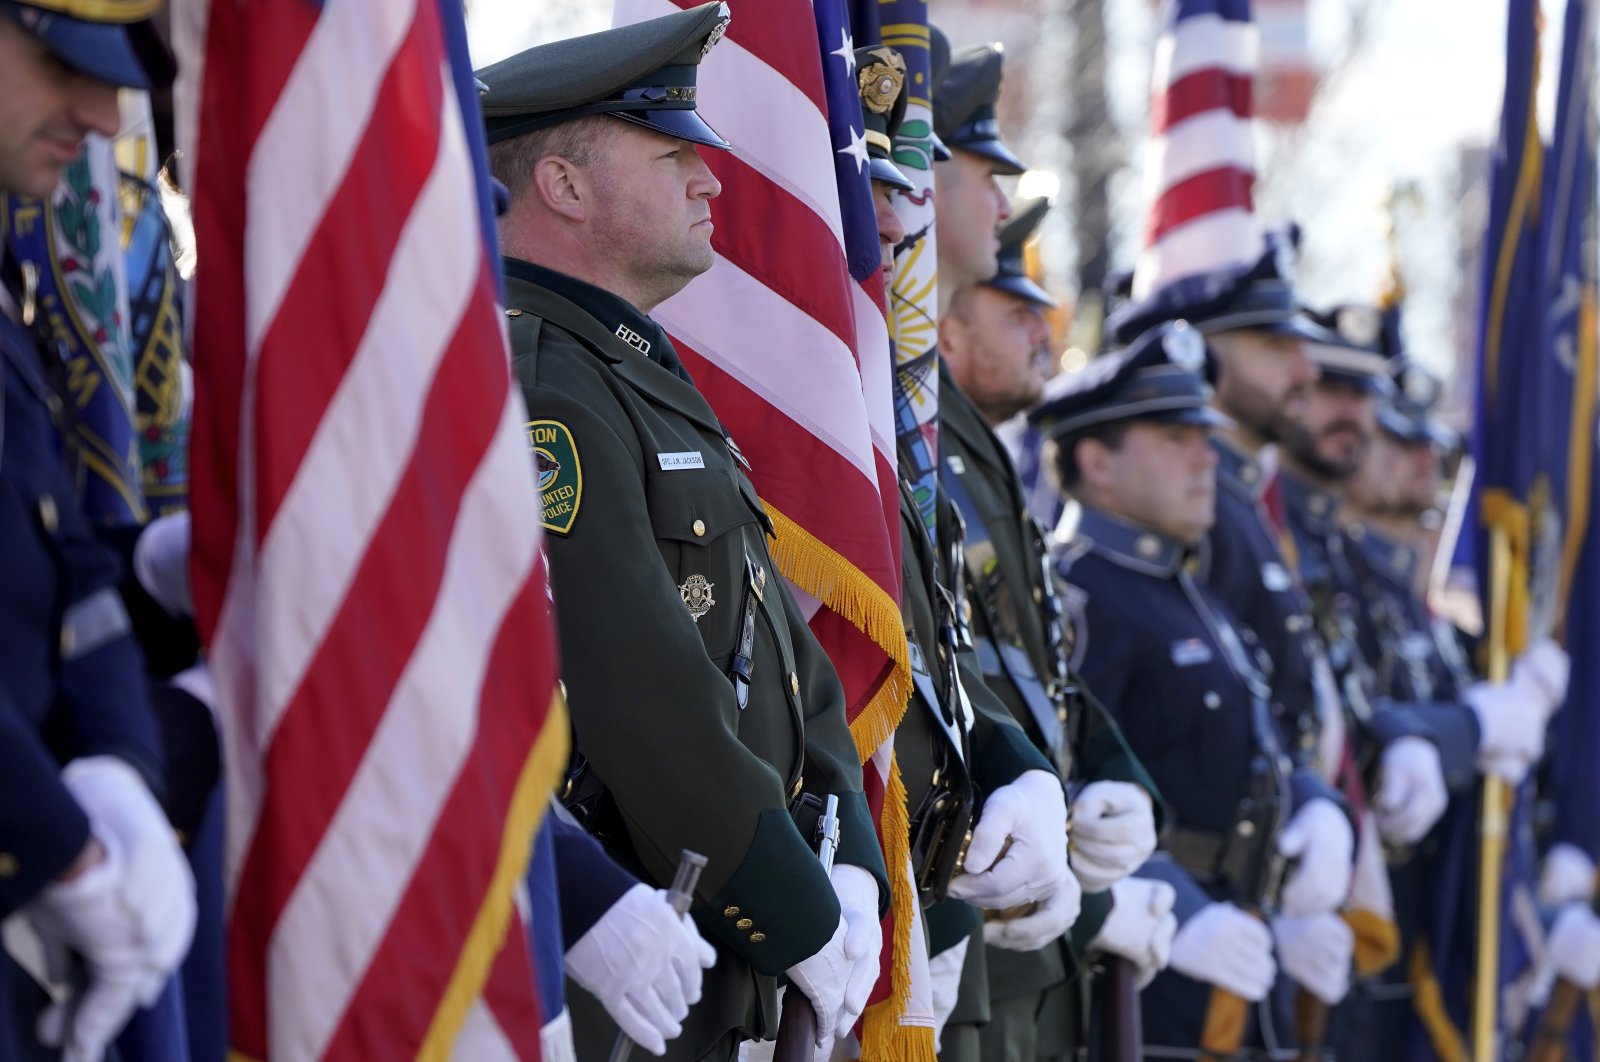 Members of law enforcement display flags outside the SNHU Arena before a Celebration of Life service for fallen N.H. State Police Staff Sergeant Jesse Sherrill, Manchester, New Hampshire, U.S., Nov. 3, 2021. (AP Photo)